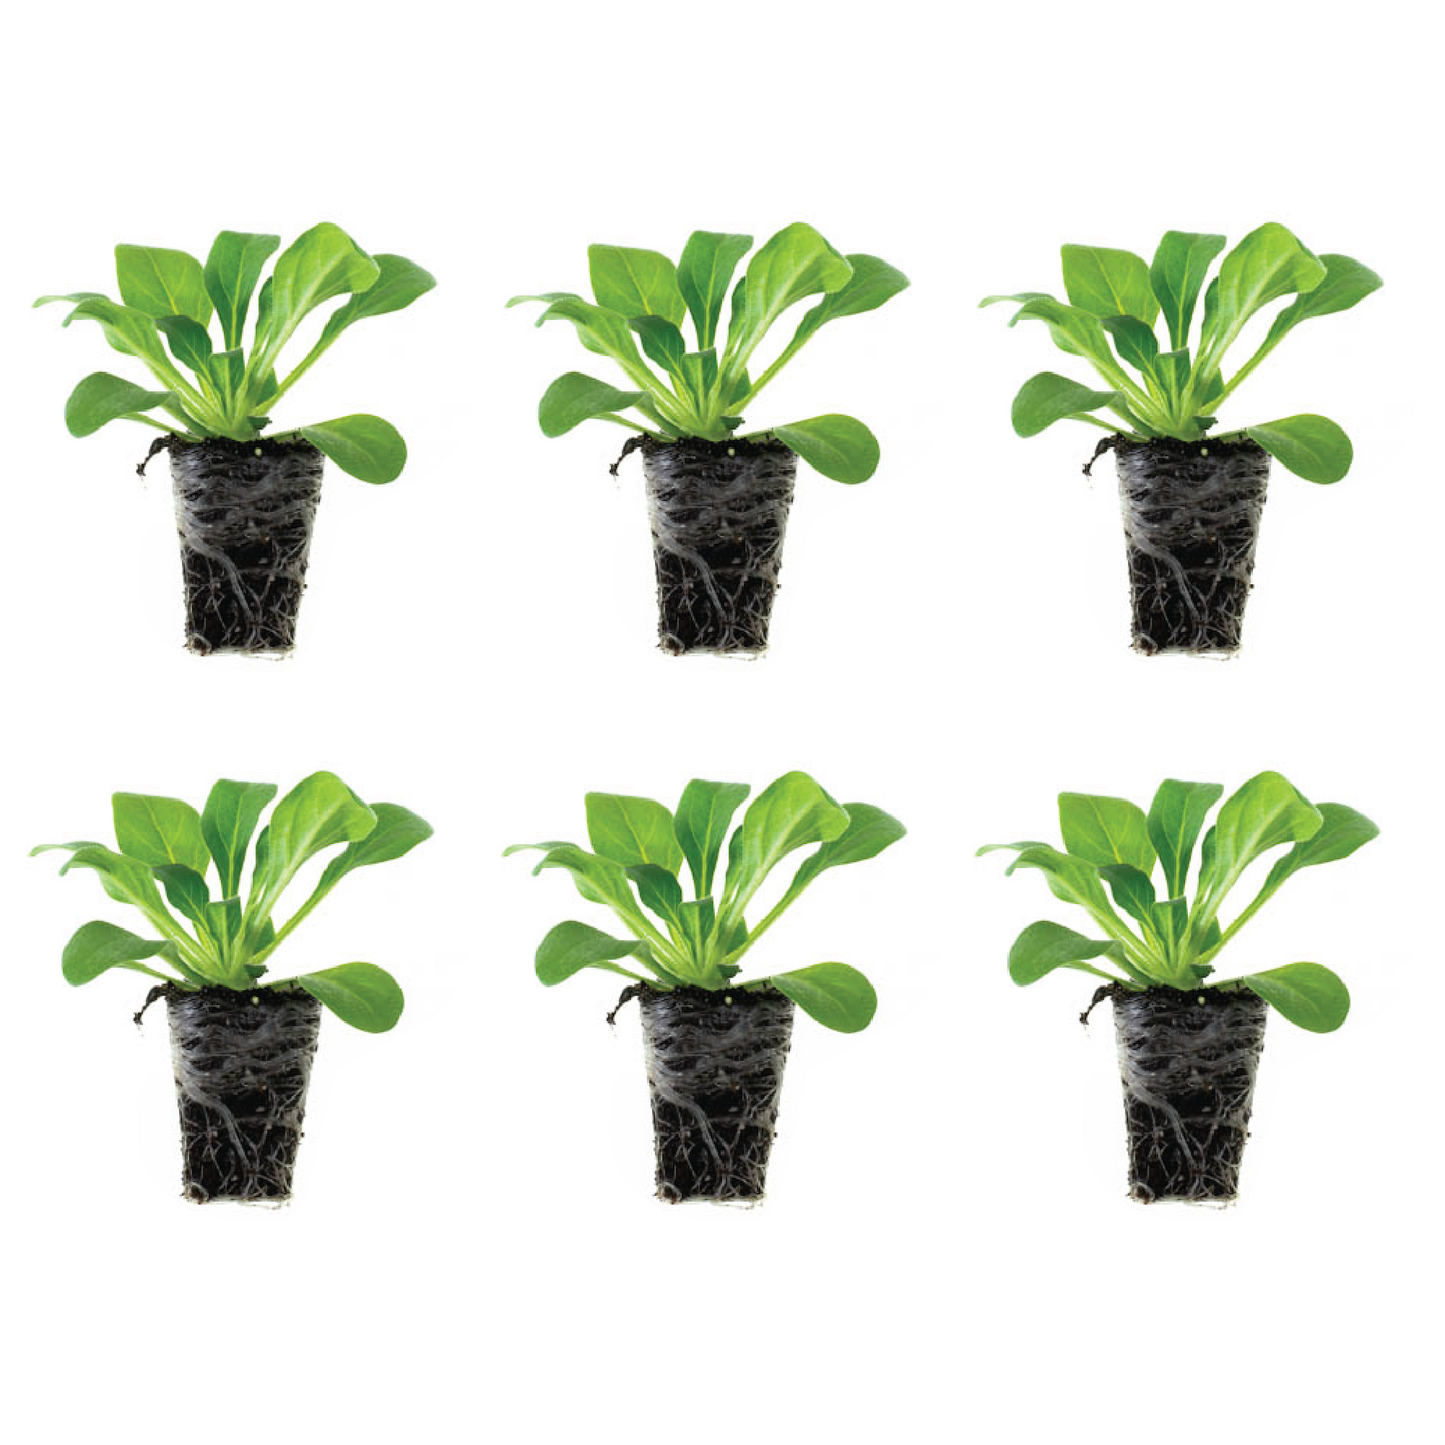 Petunia Easy Wave® Blue Improved Plantlings Live Baby Plants 1-3in., 6-Pack